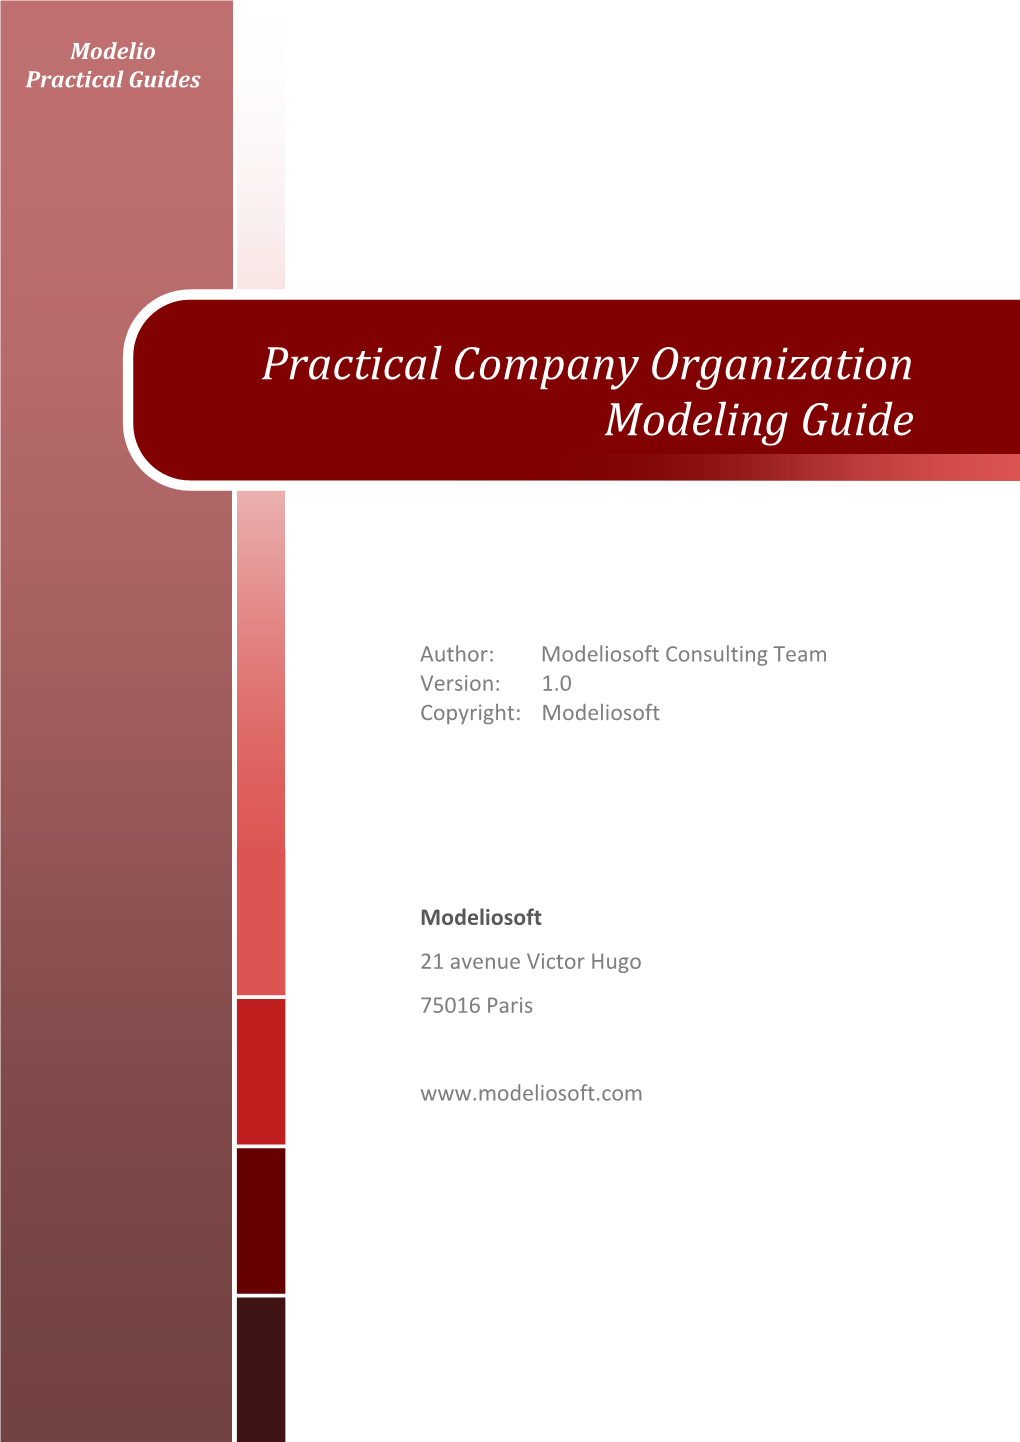 Practical Company Organization Modeling Guide